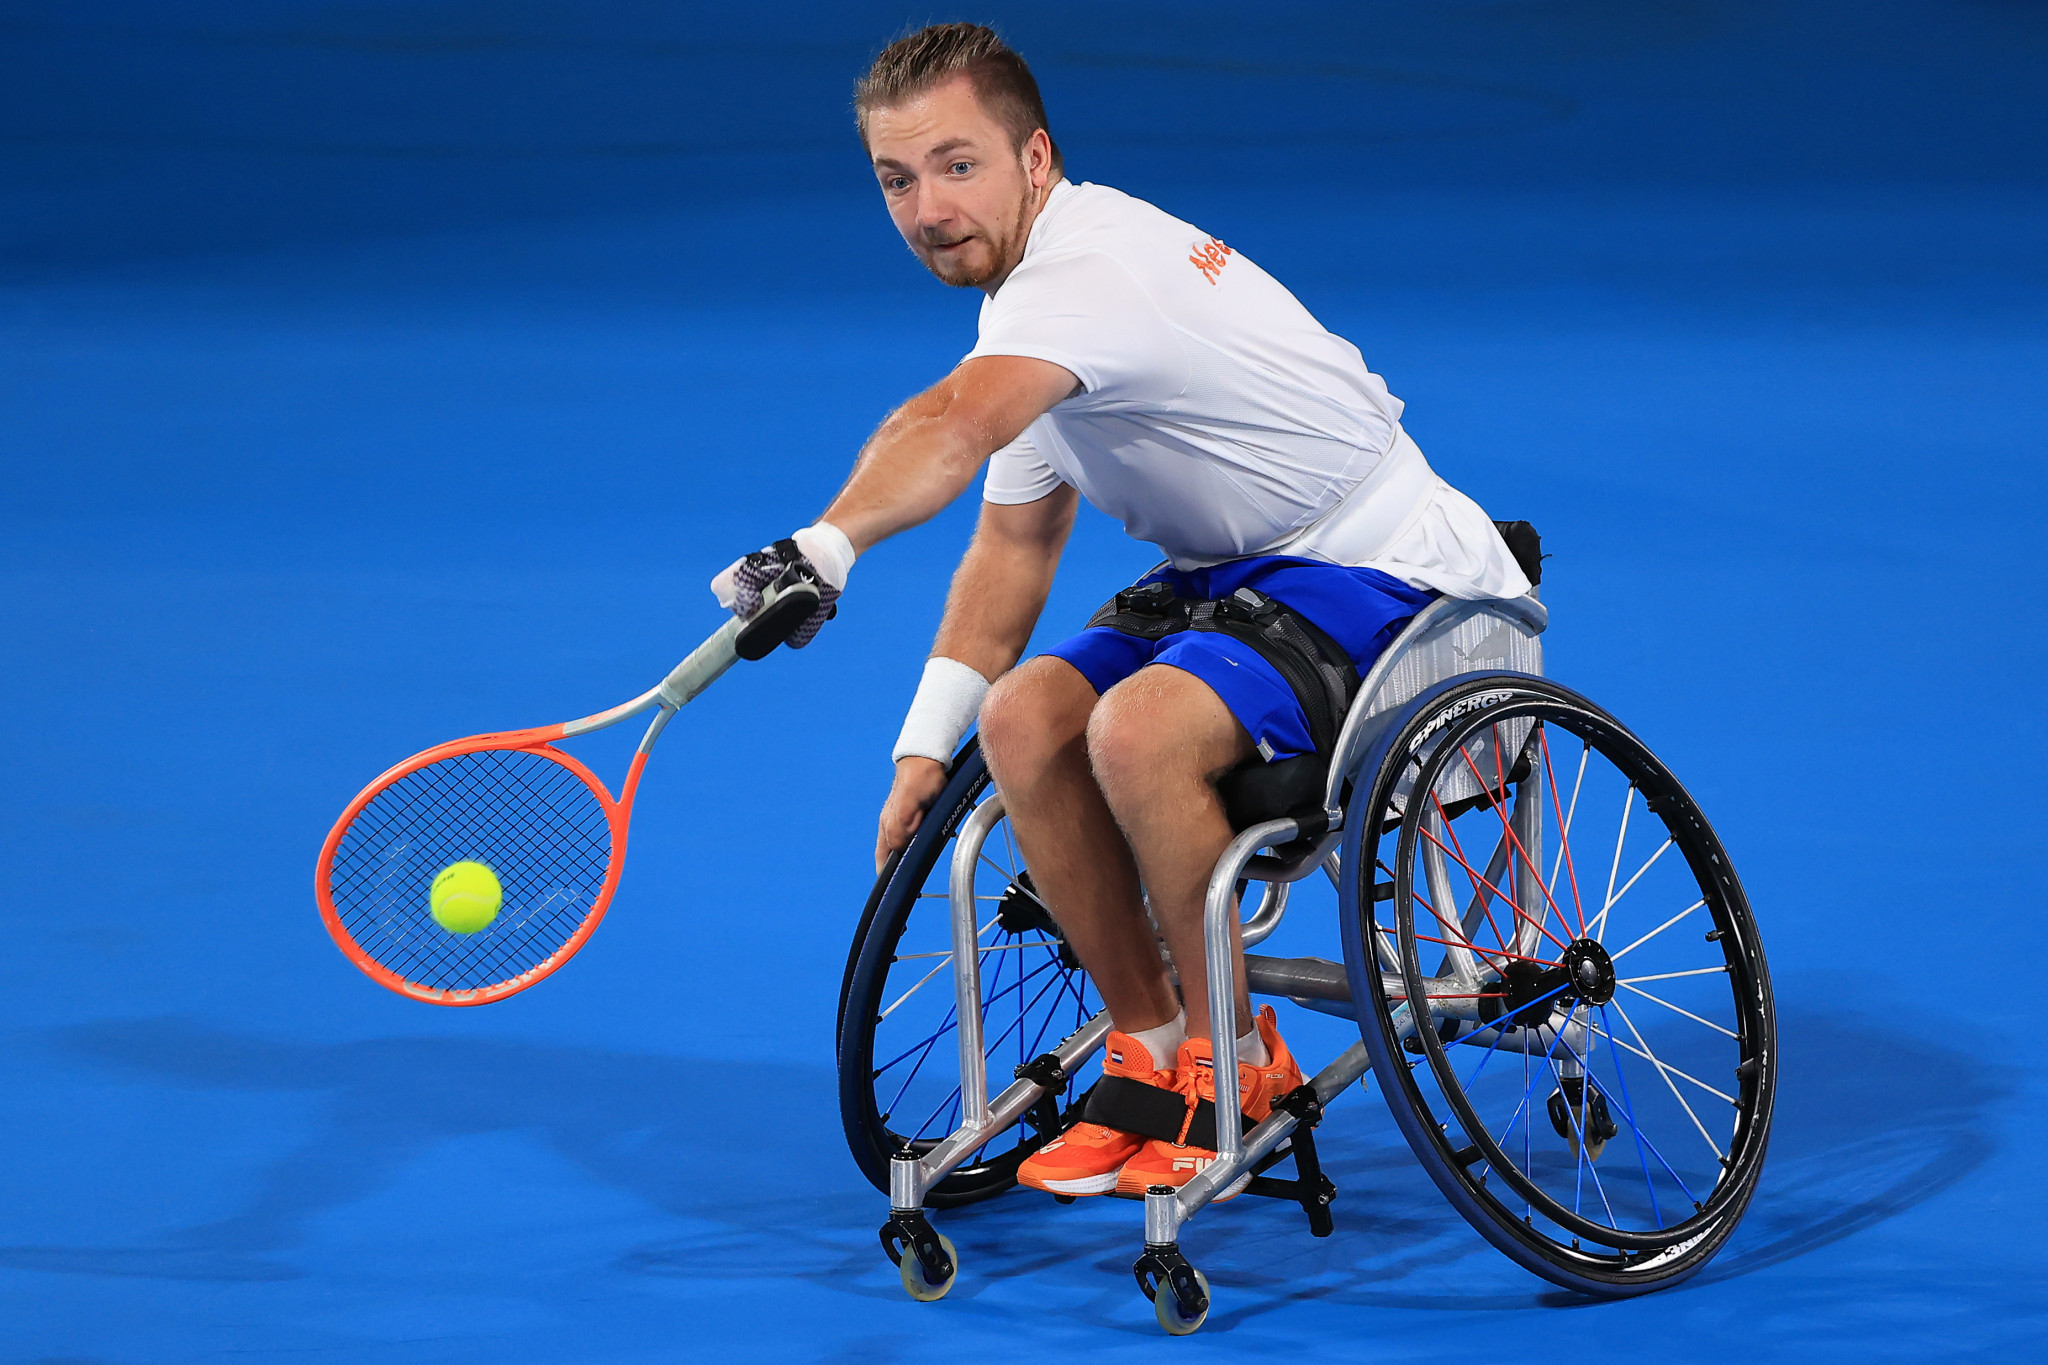 Schroder and Vink top groups after winning second quad singles matches at NEC Wheelchair Masters